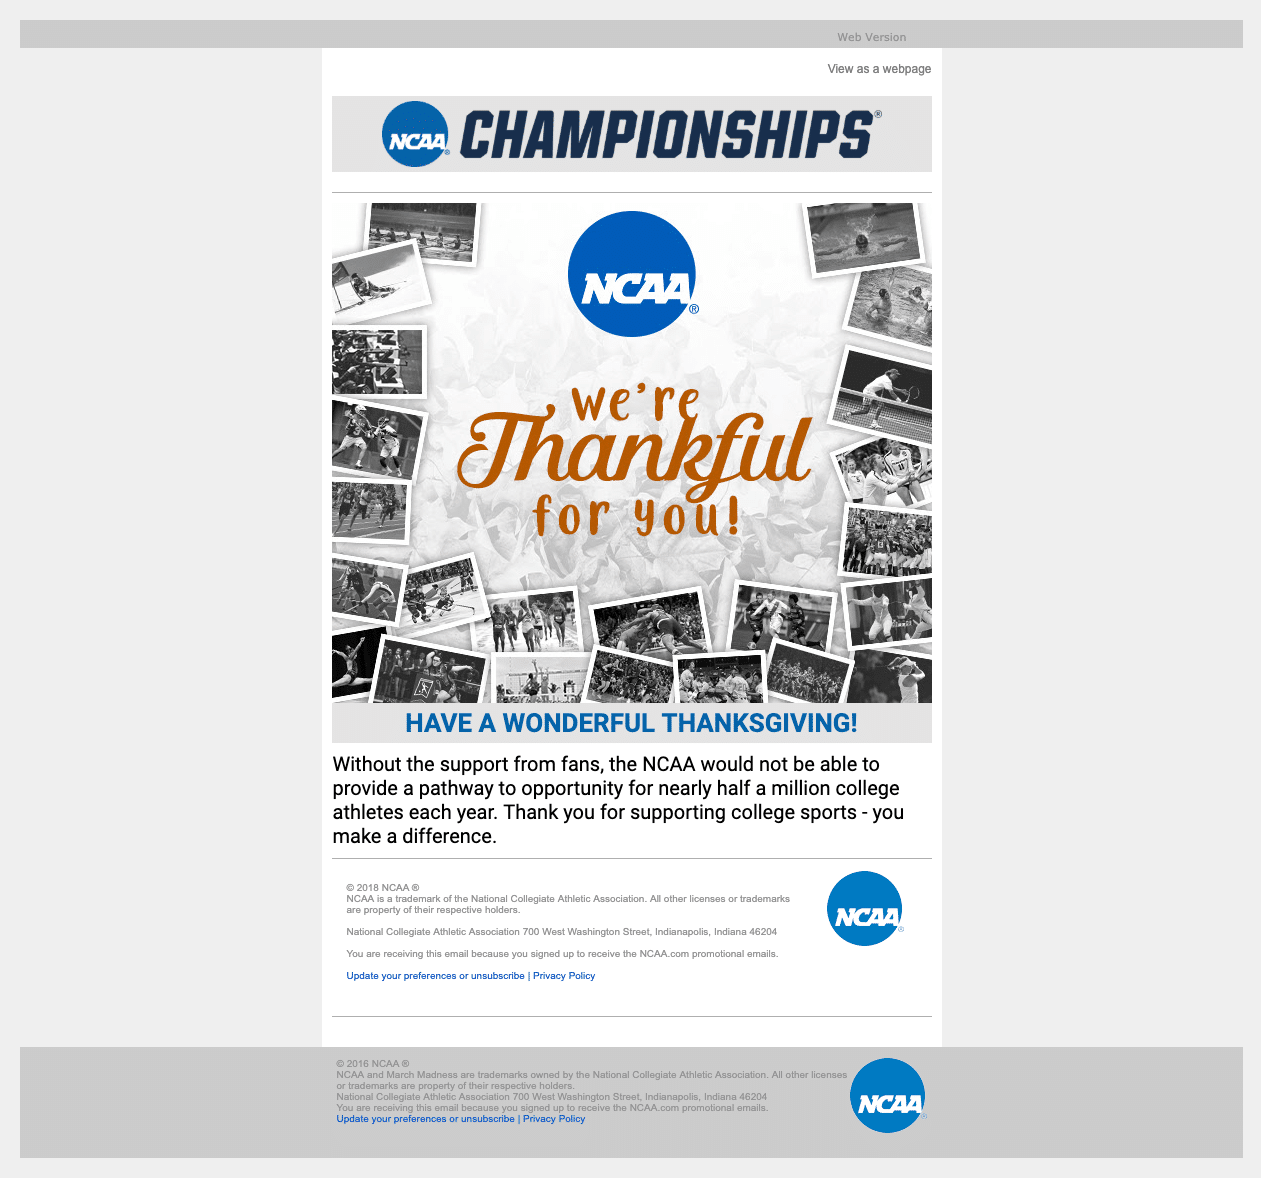 Thanksgiving email from NCAA thanking contacts for supporting student athletes over the past year